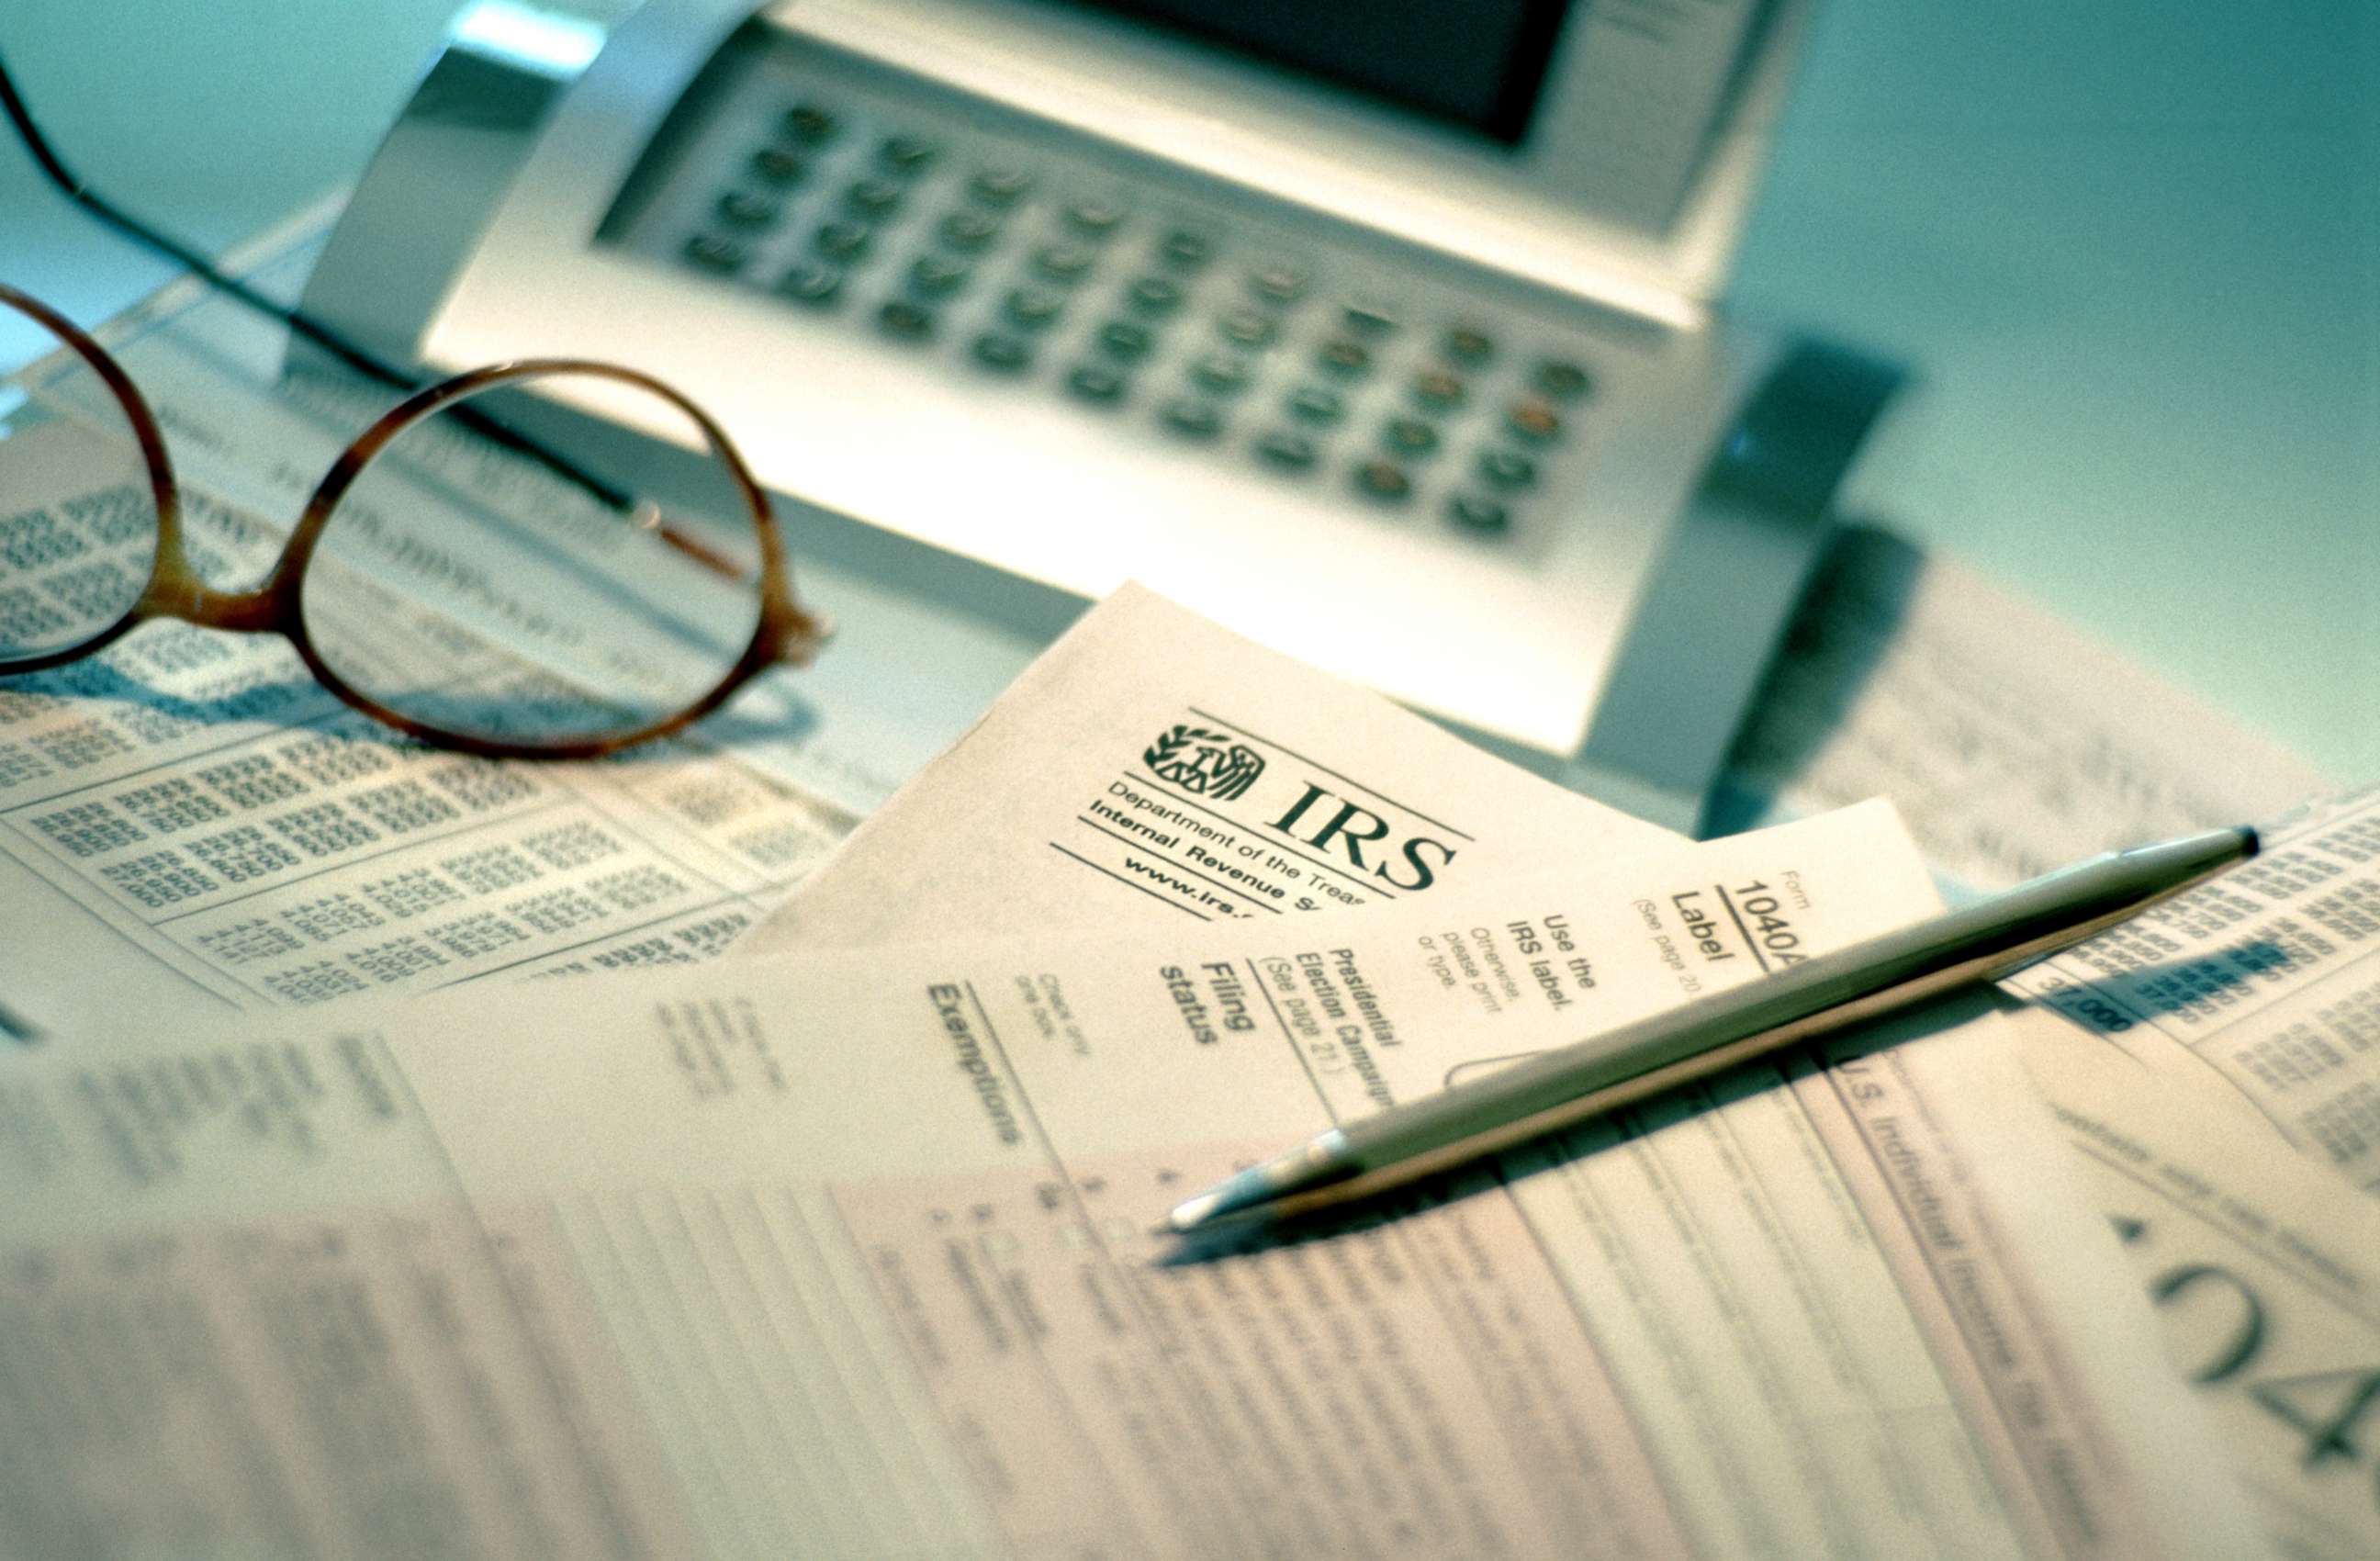 PHOTO: Tax documents are seen in this stock photo.